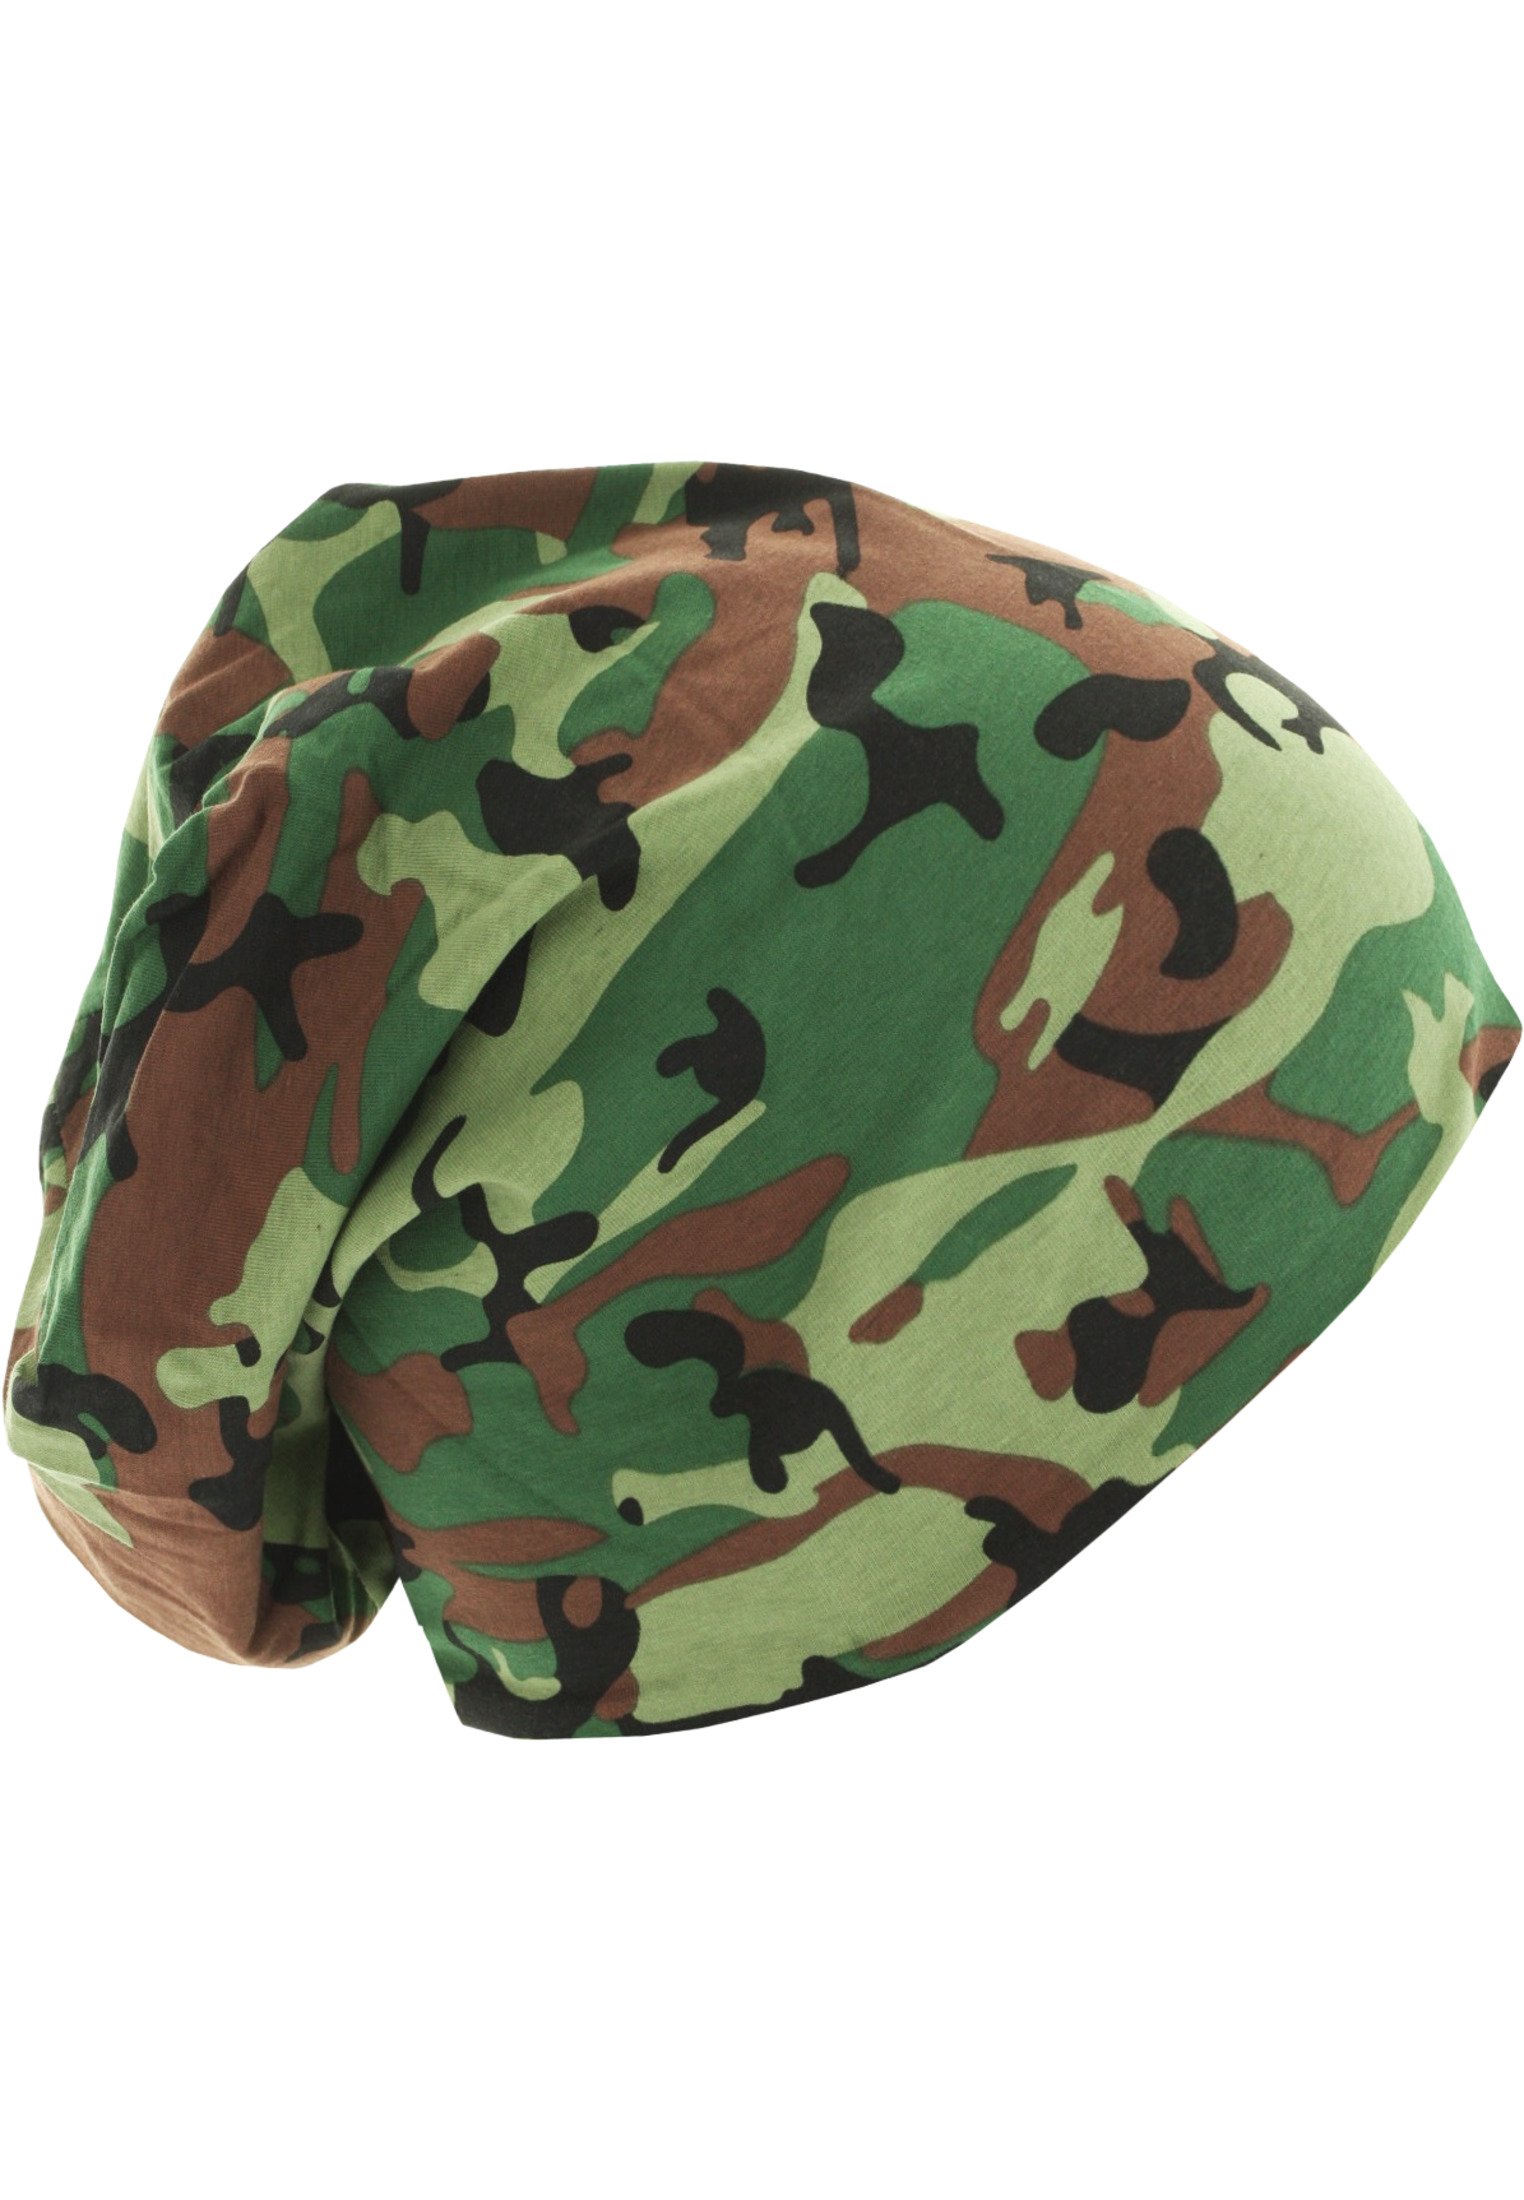 Printed Jersey Beanie green camo/black one size